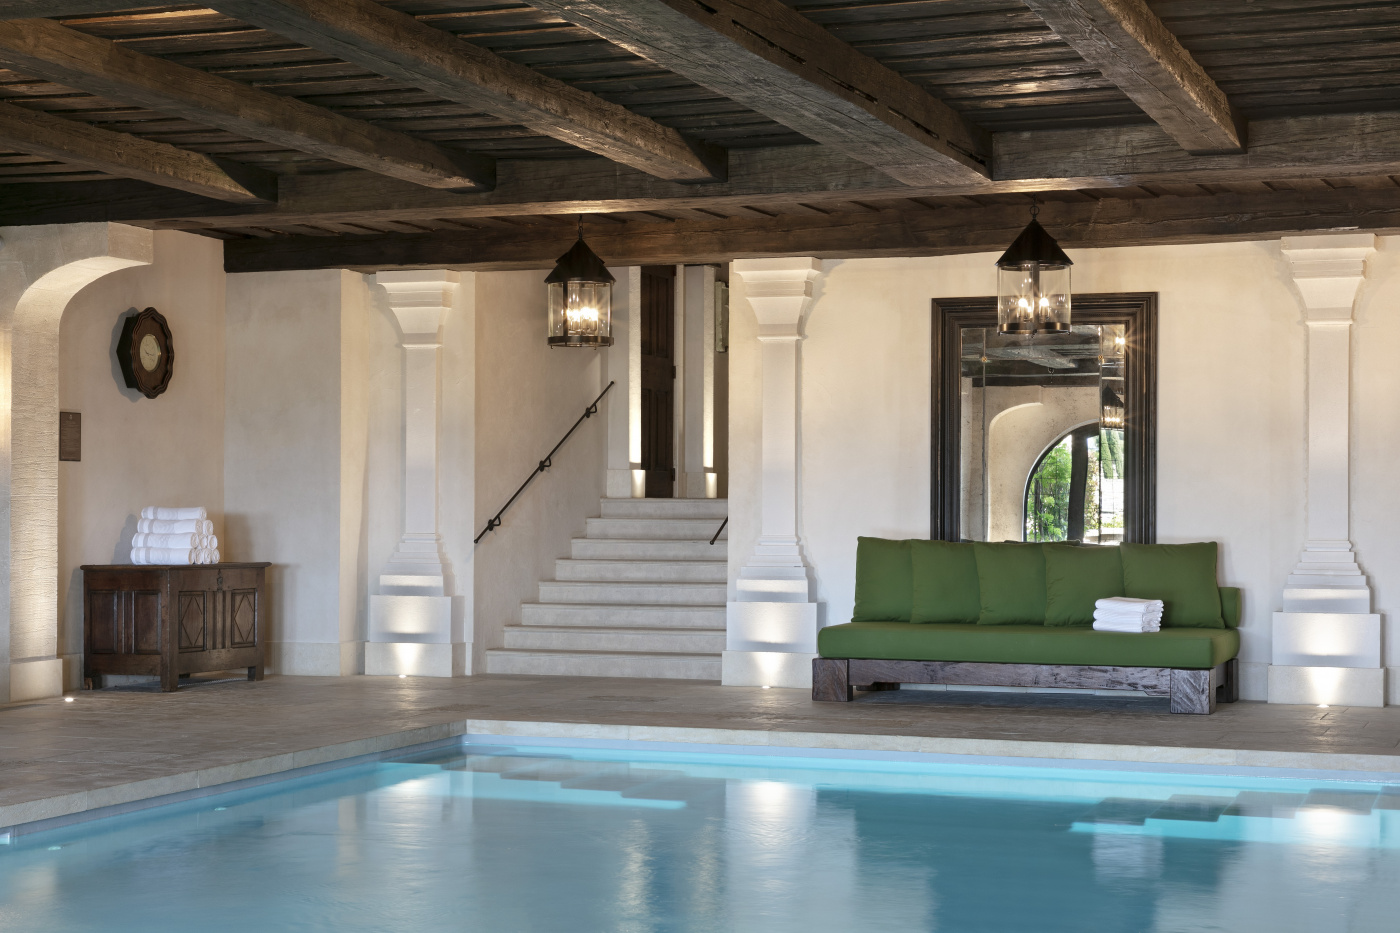 Indoor swimming pool at Spa of luxury wedding villa in France